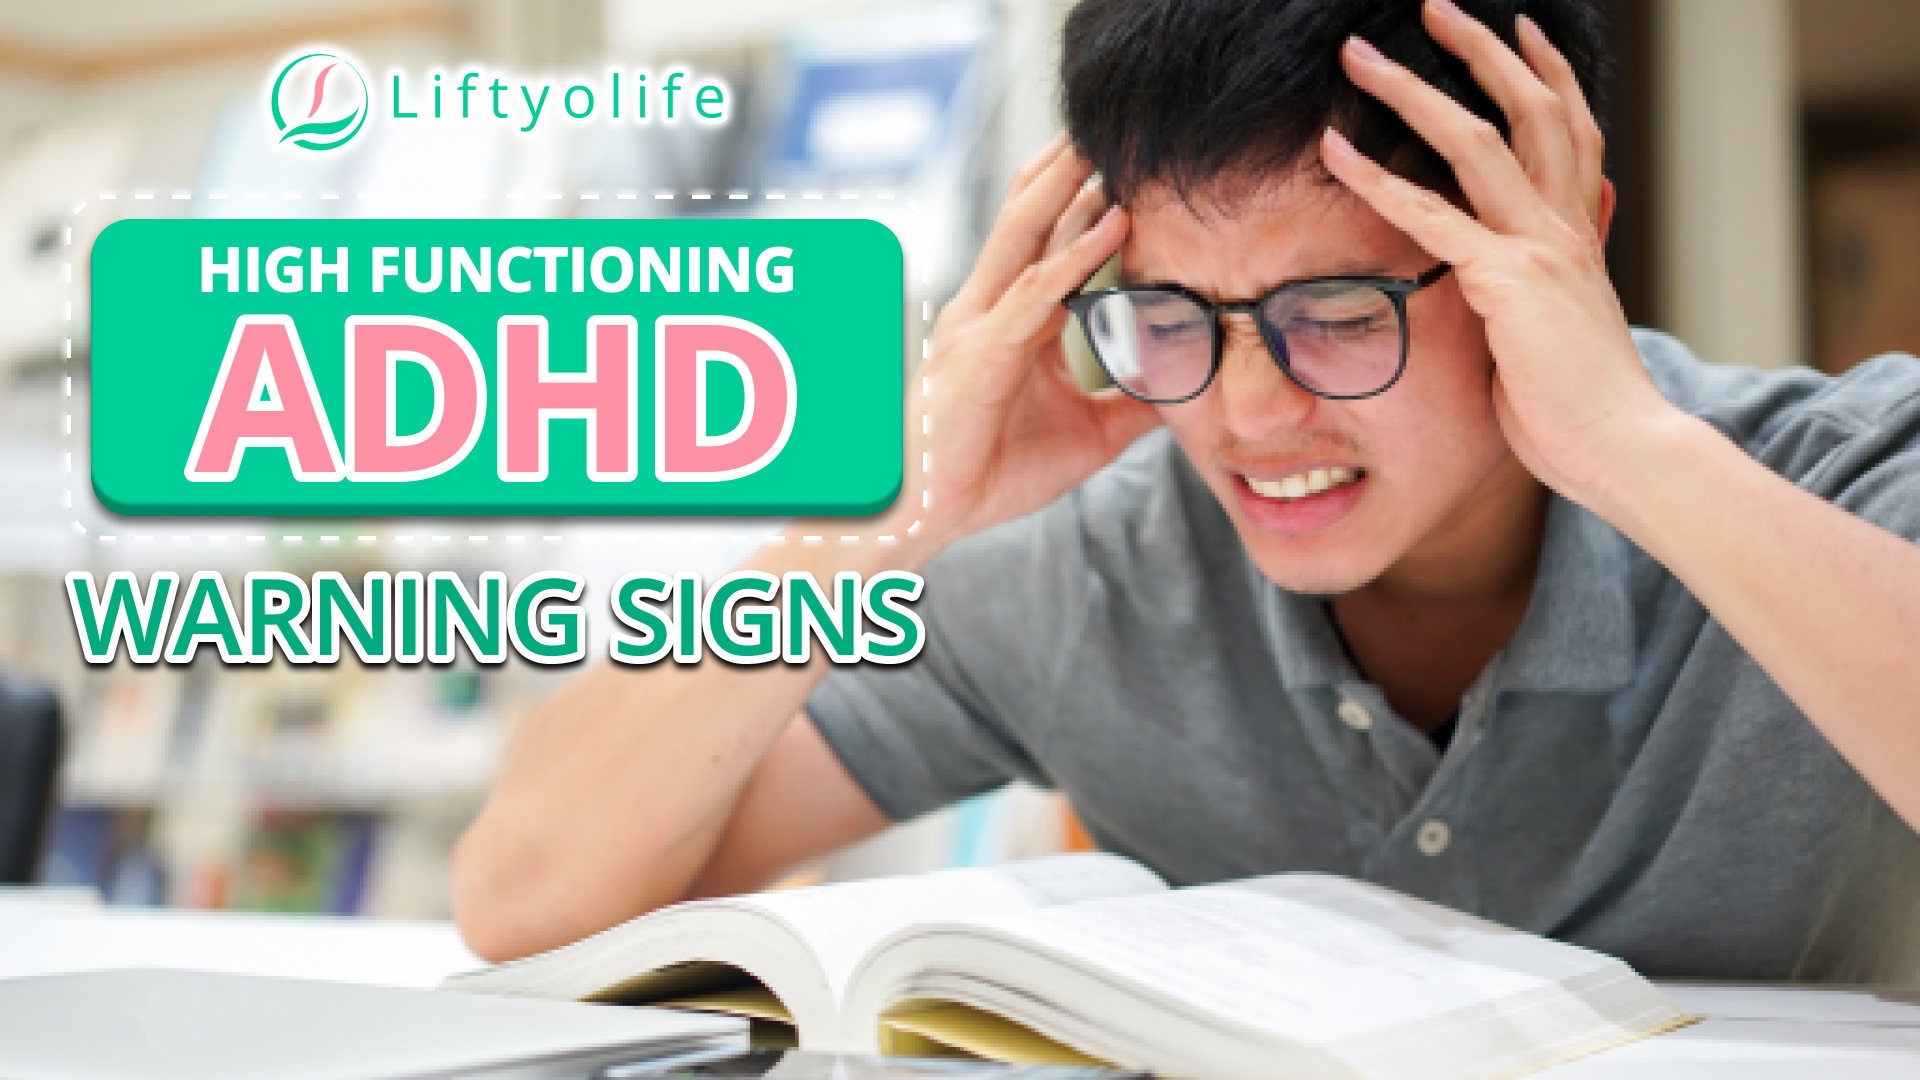 5+ Signs Of High Functioning ADHD You Should Know